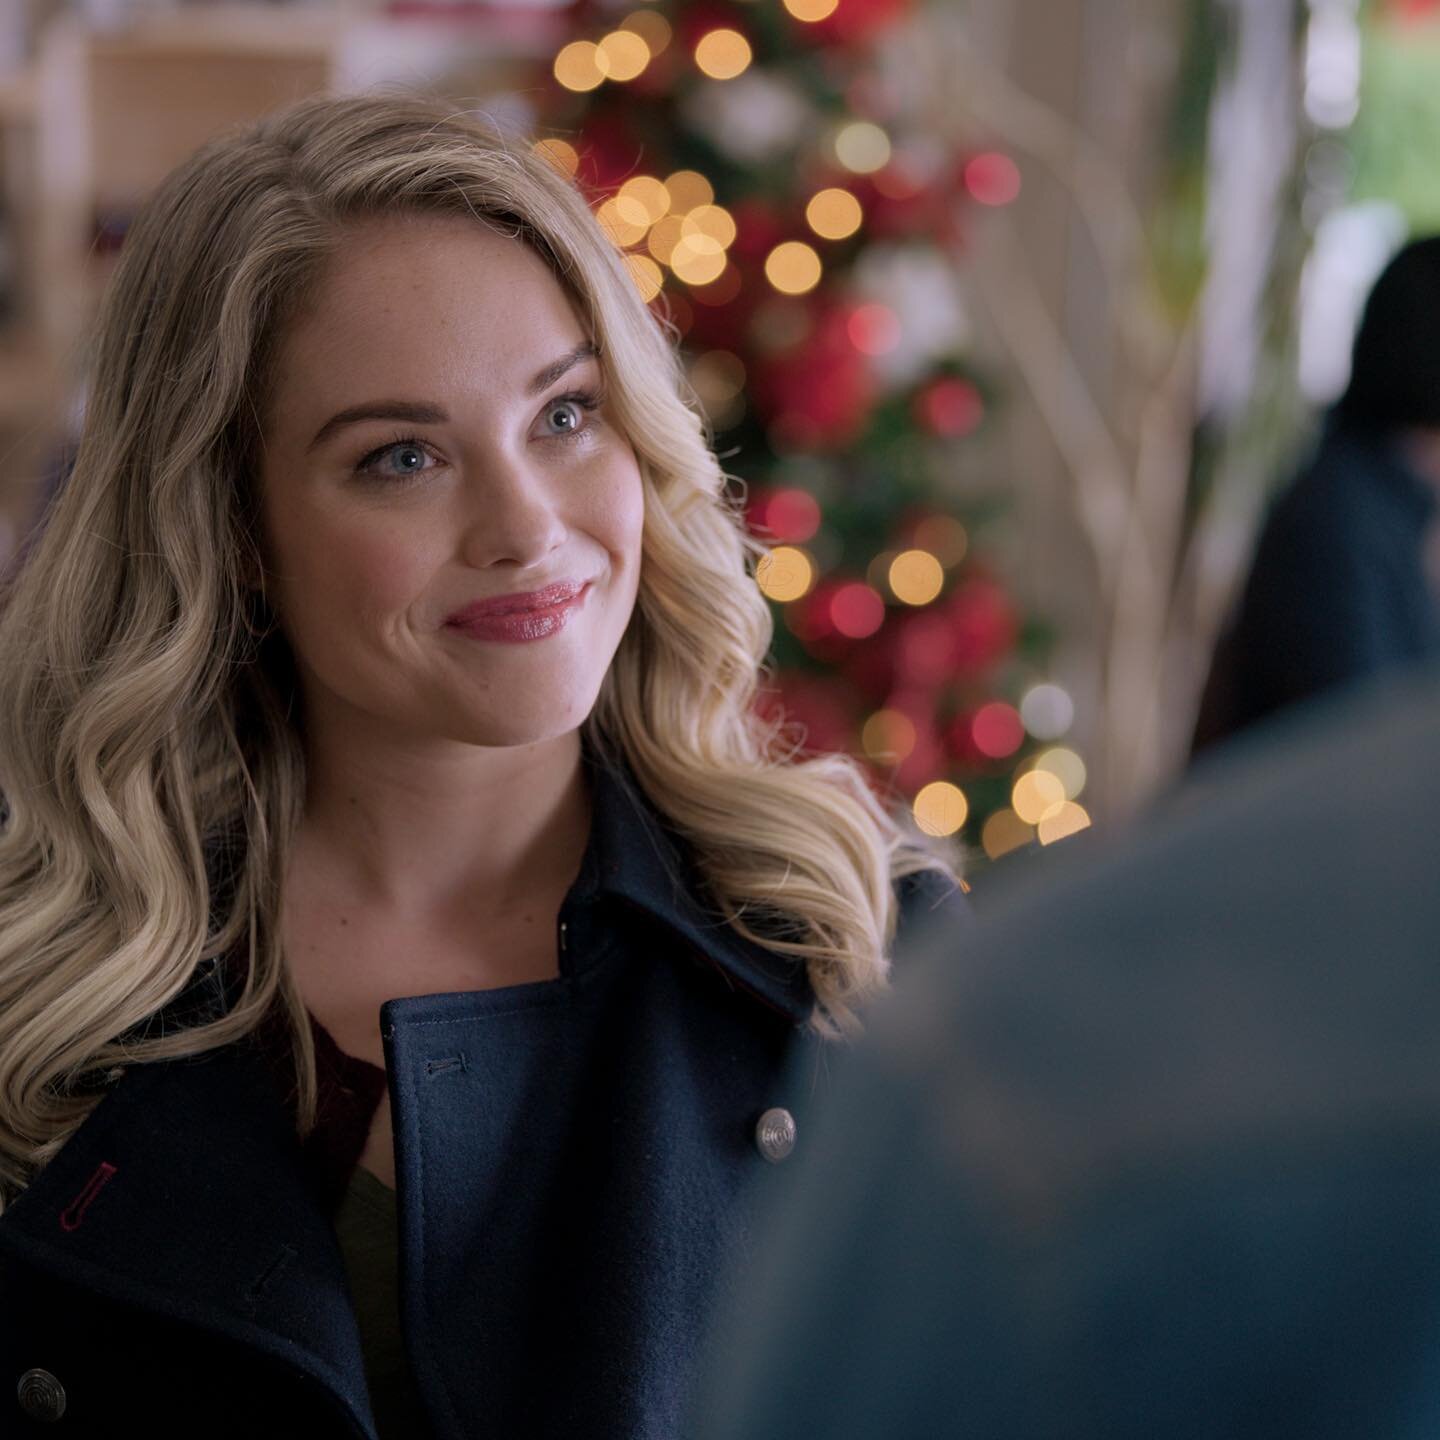 It&rsquo;s tomorrow, it&rsquo;s tomorrow! Let us know if you&rsquo;re excited to watch @stephaniedbennett as Erin in Lonestar Christmas! Tomorrow at 8pm on @lifetimetv USA ☺️☺️☺️